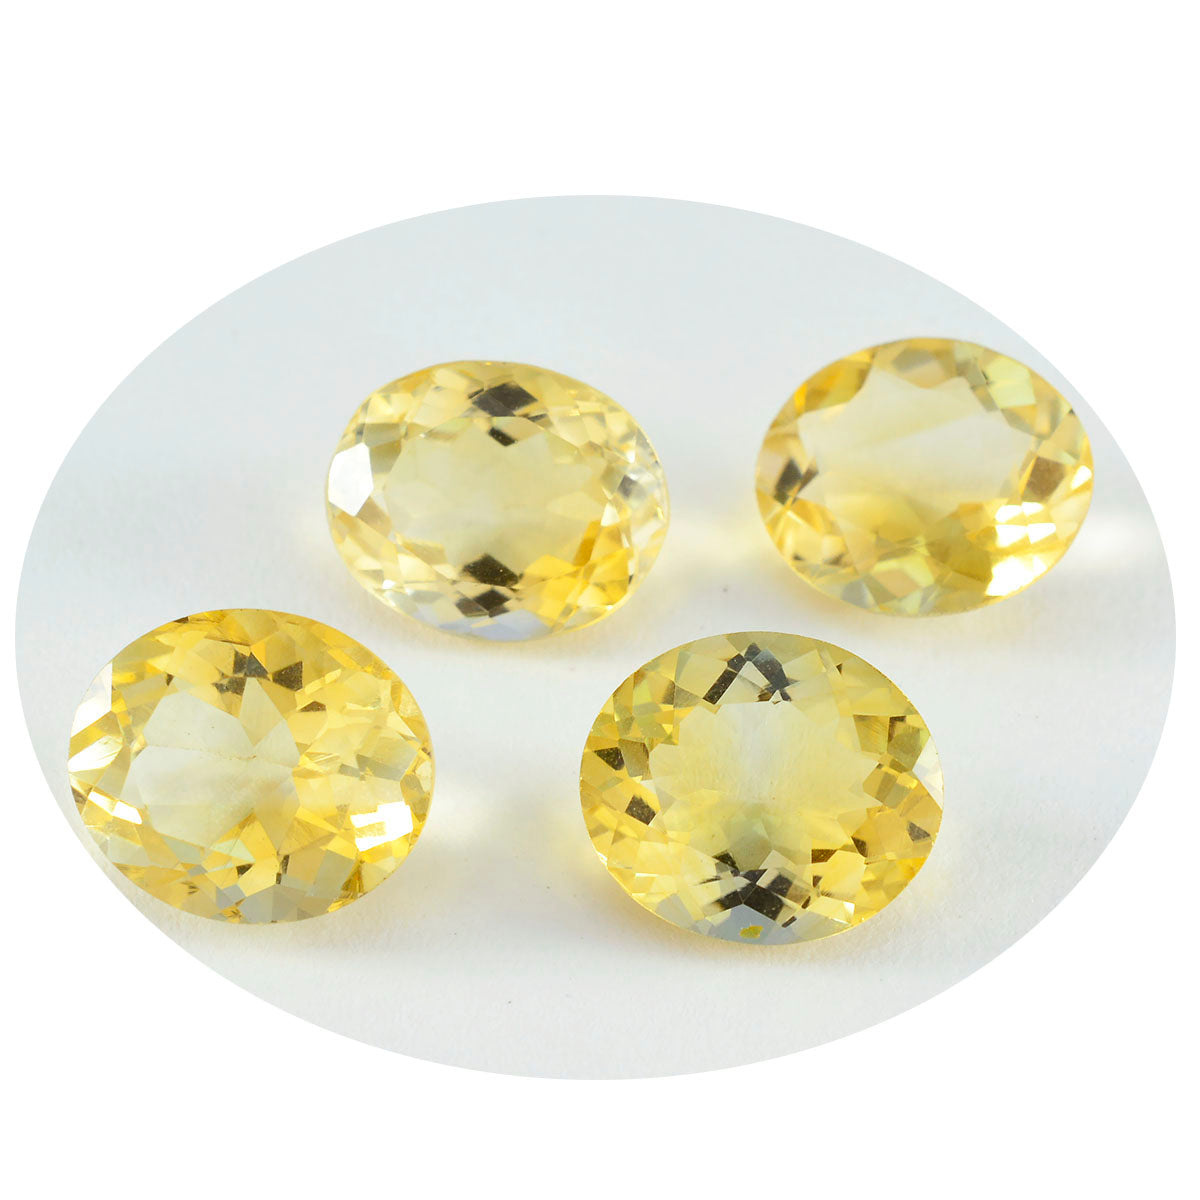 Riyogems 1PC Real Yellow Citrine Faceted 9x11 mm Oval Shape good-looking Quality Gems